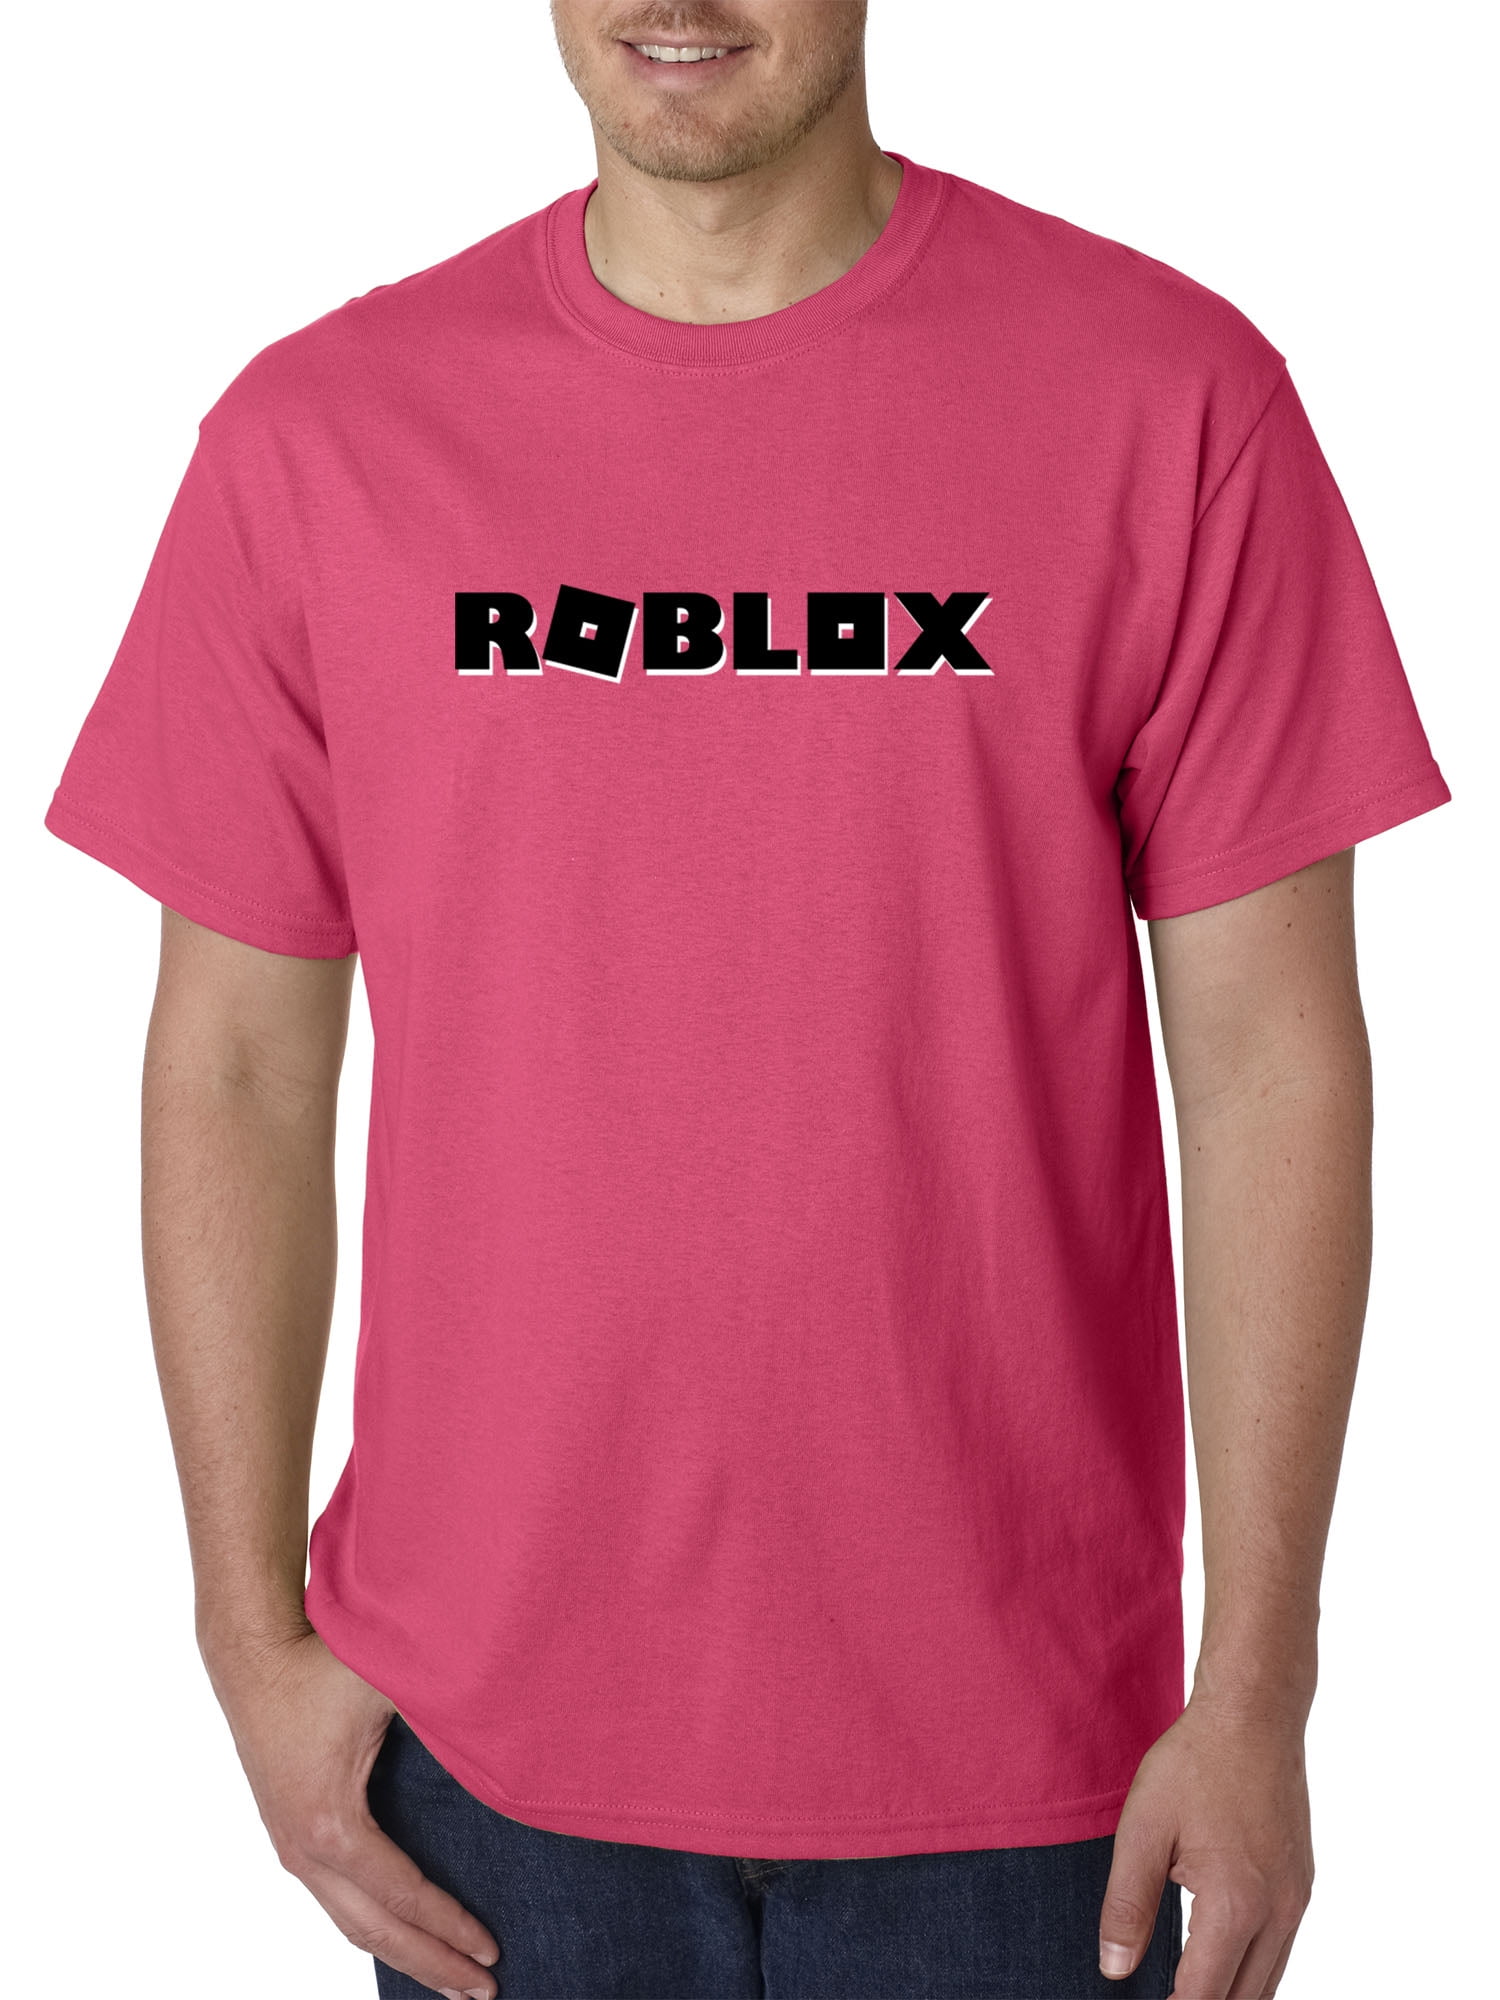 Create Shirts Roblox Fertilizer Society Of Tanzania - how to make your own t shirt in roblox without bc